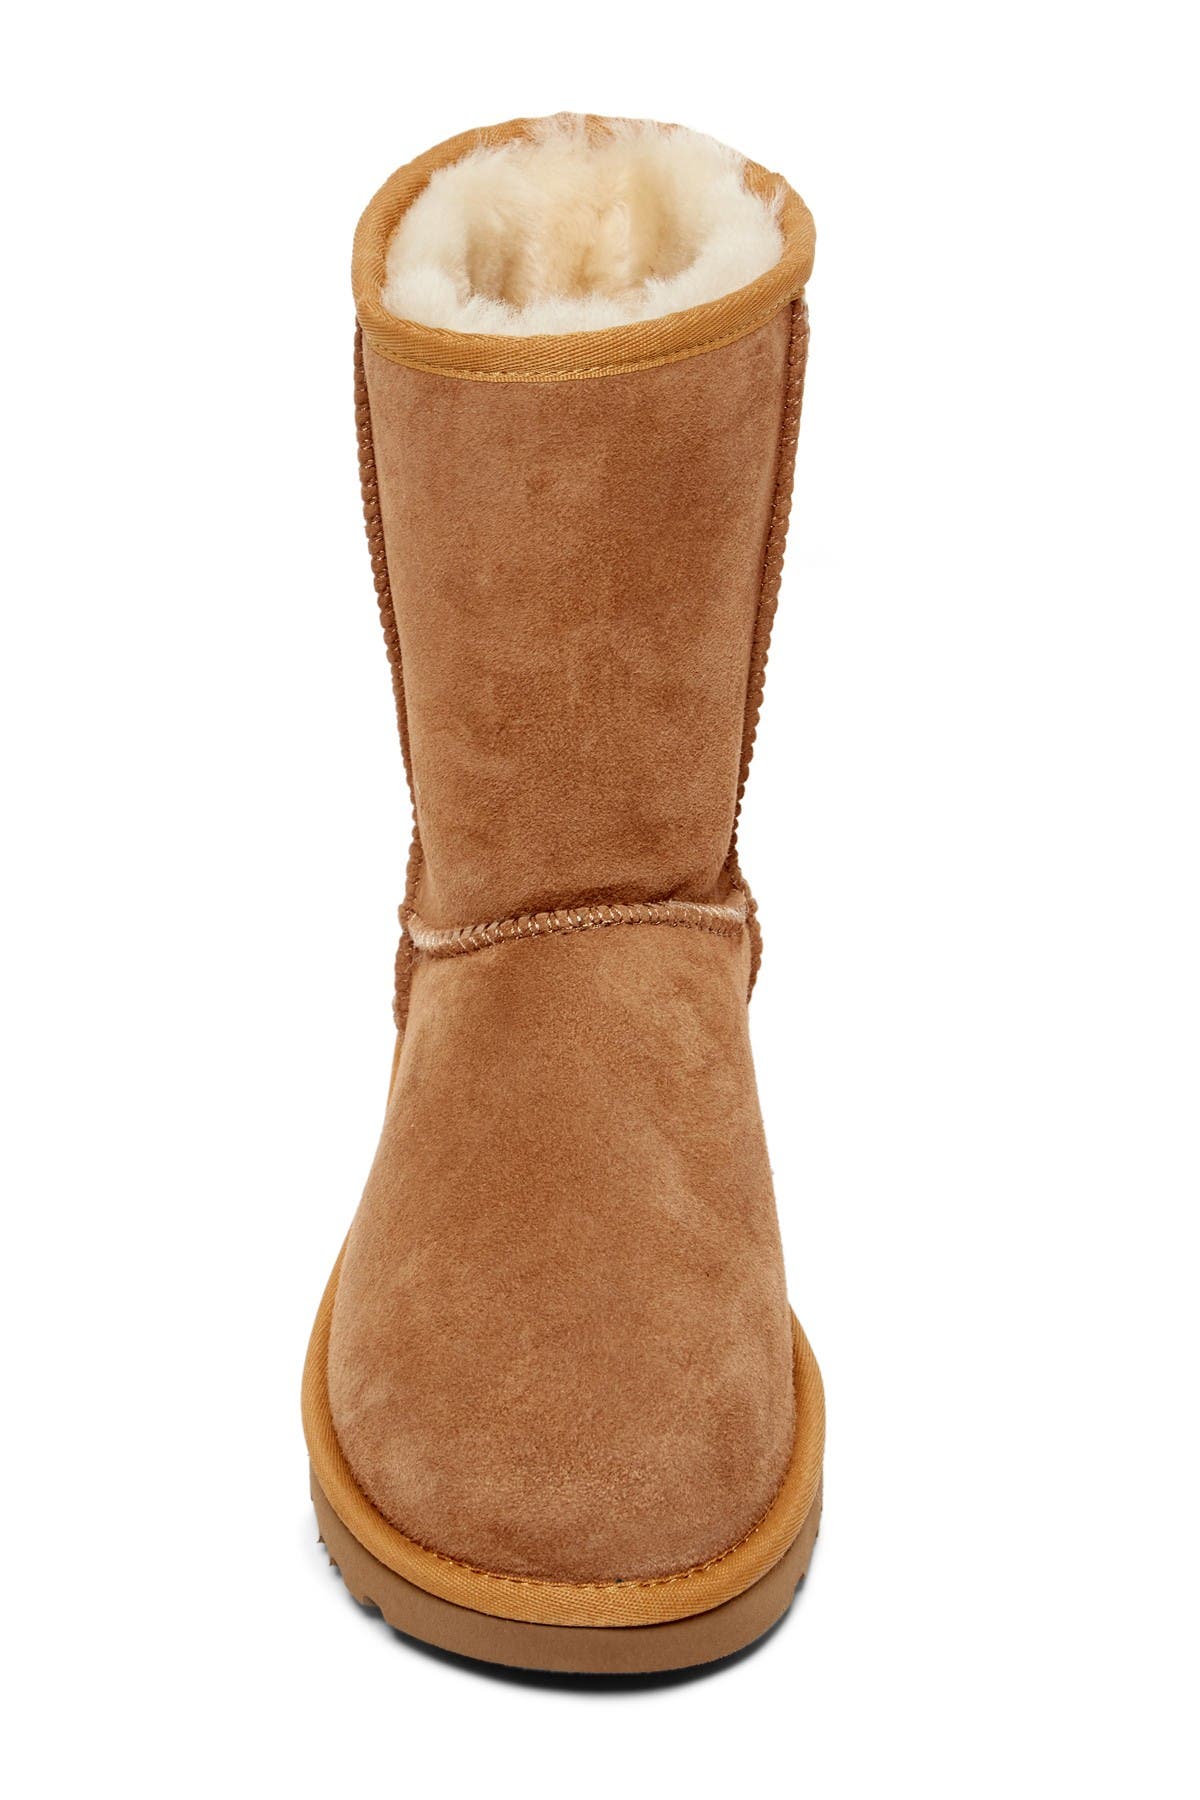 classic genuine shearling lined short rustic weave boot